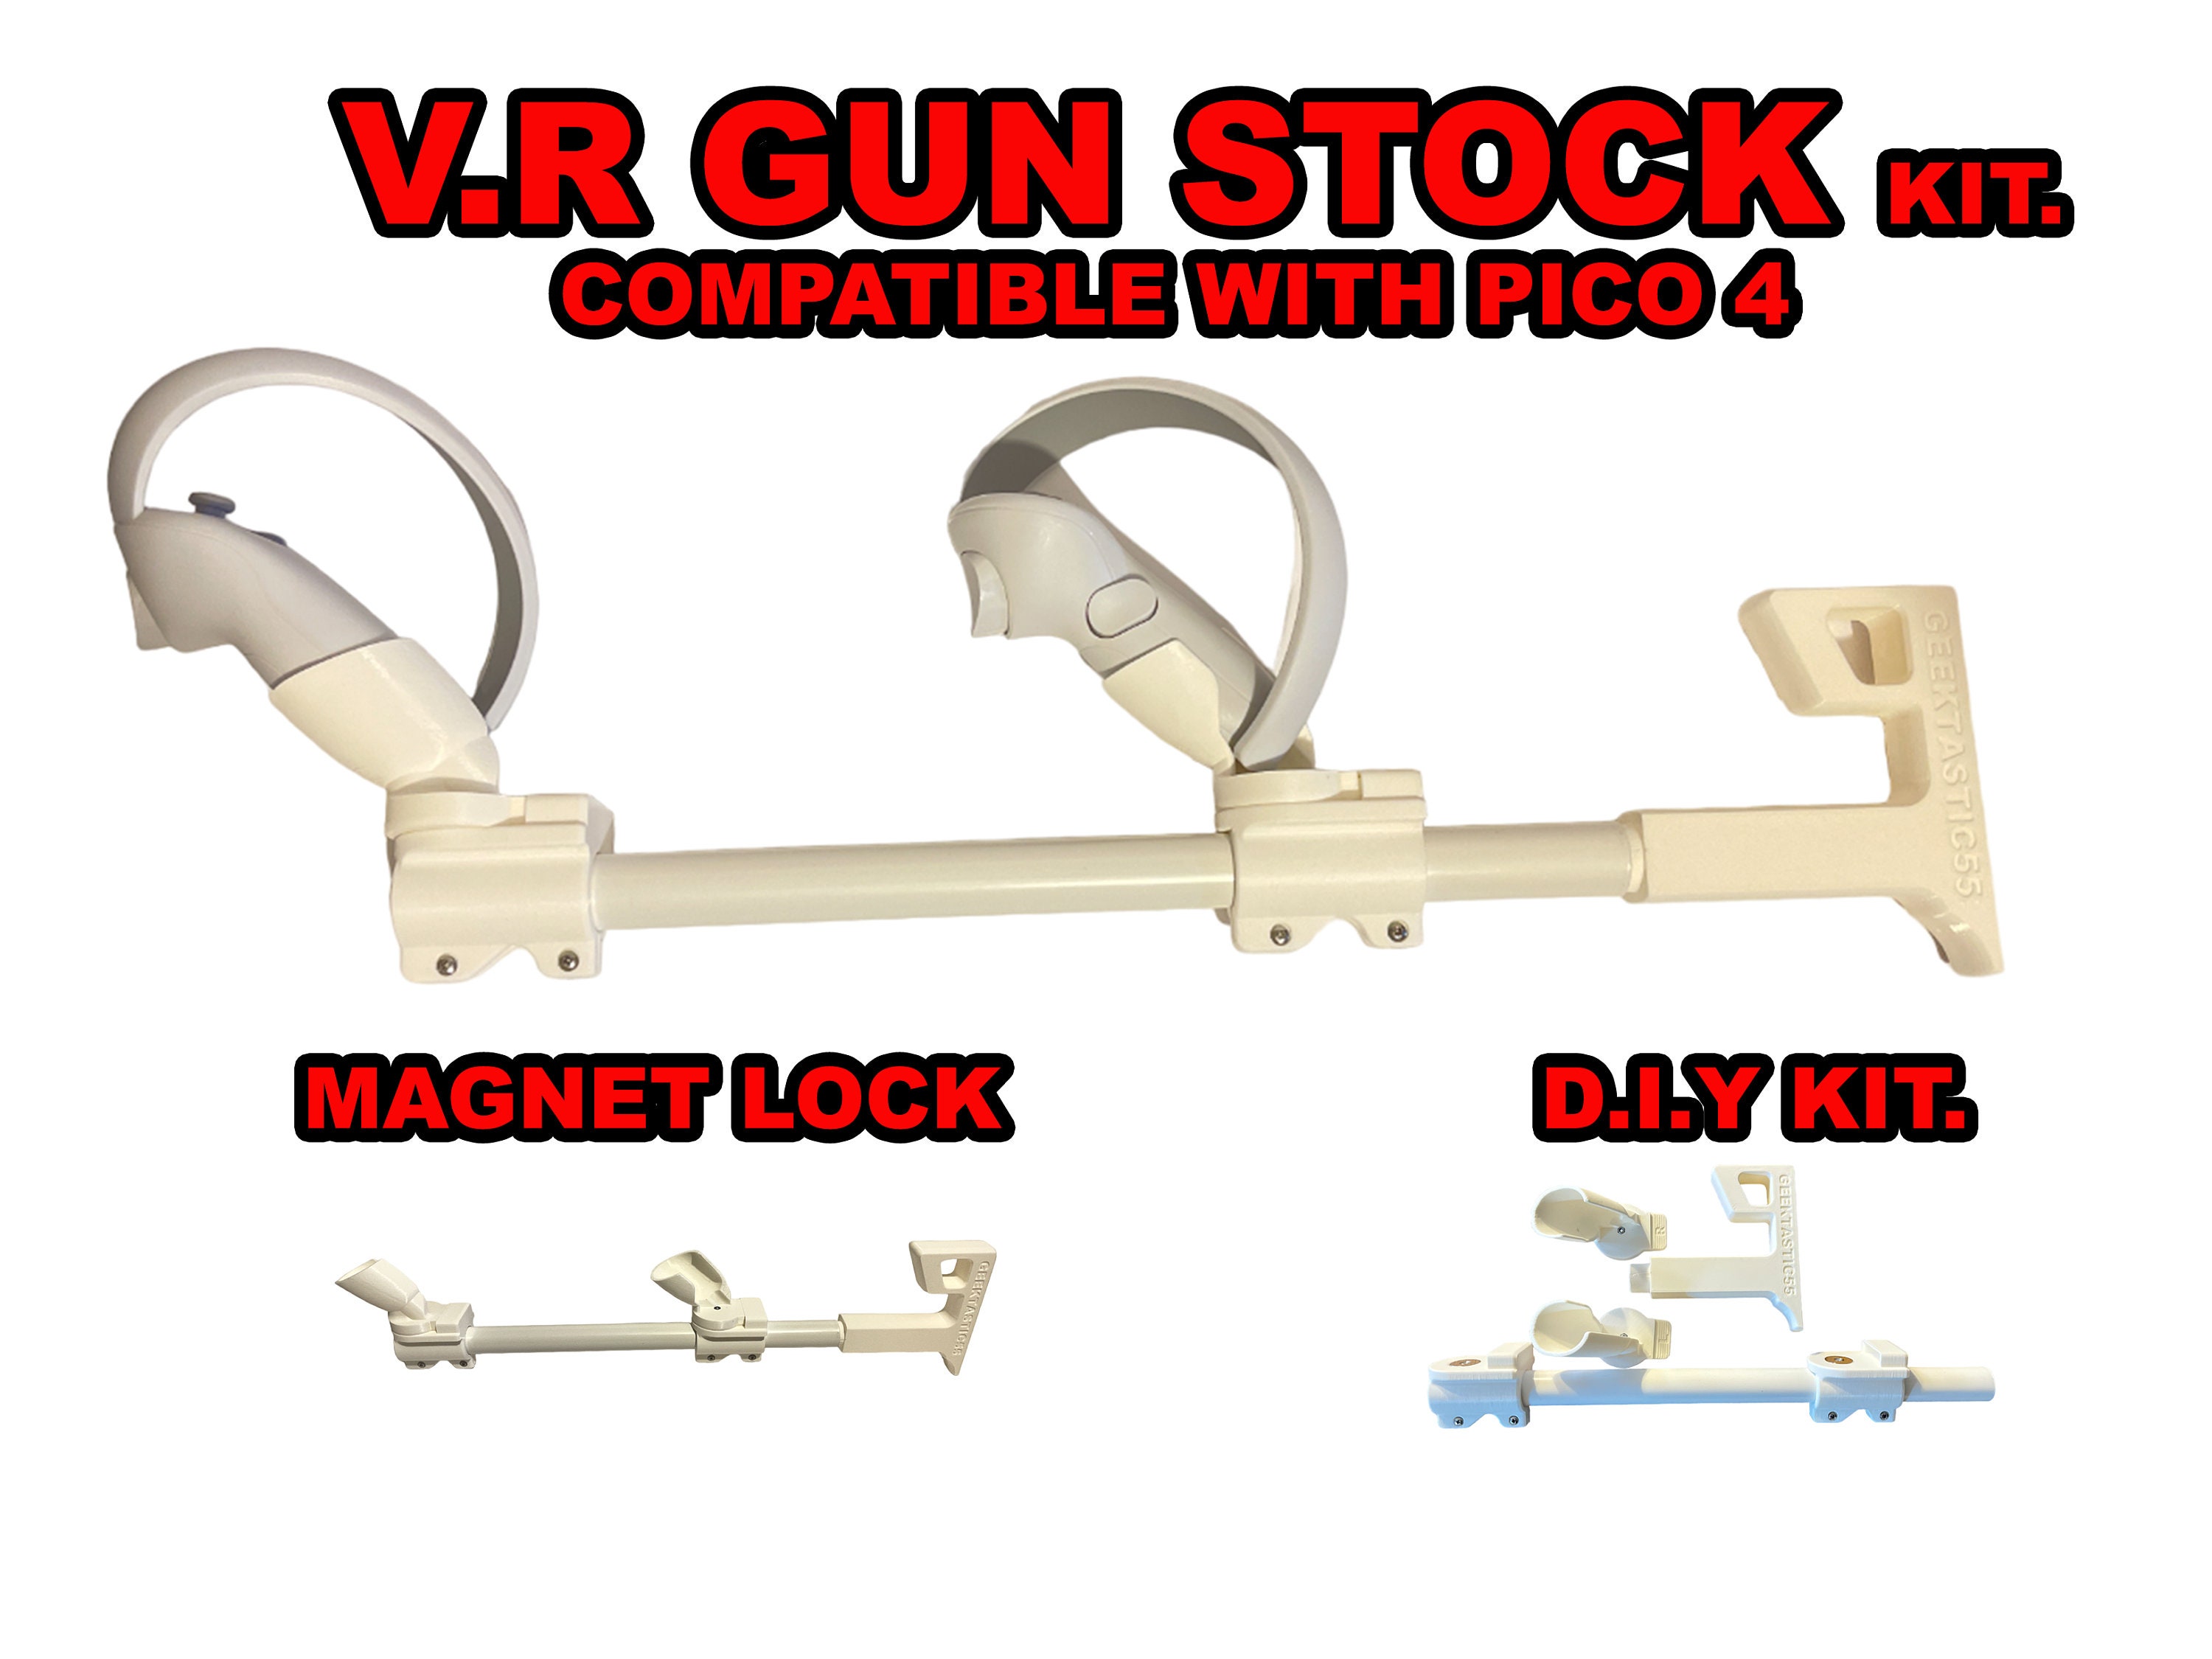 VR Gun Stock Fits Pico 4 Controllers. Gunstock for VR. DIY Kit Everything  Included. First Pico 4 Compatible Stock on the Market and the Best 